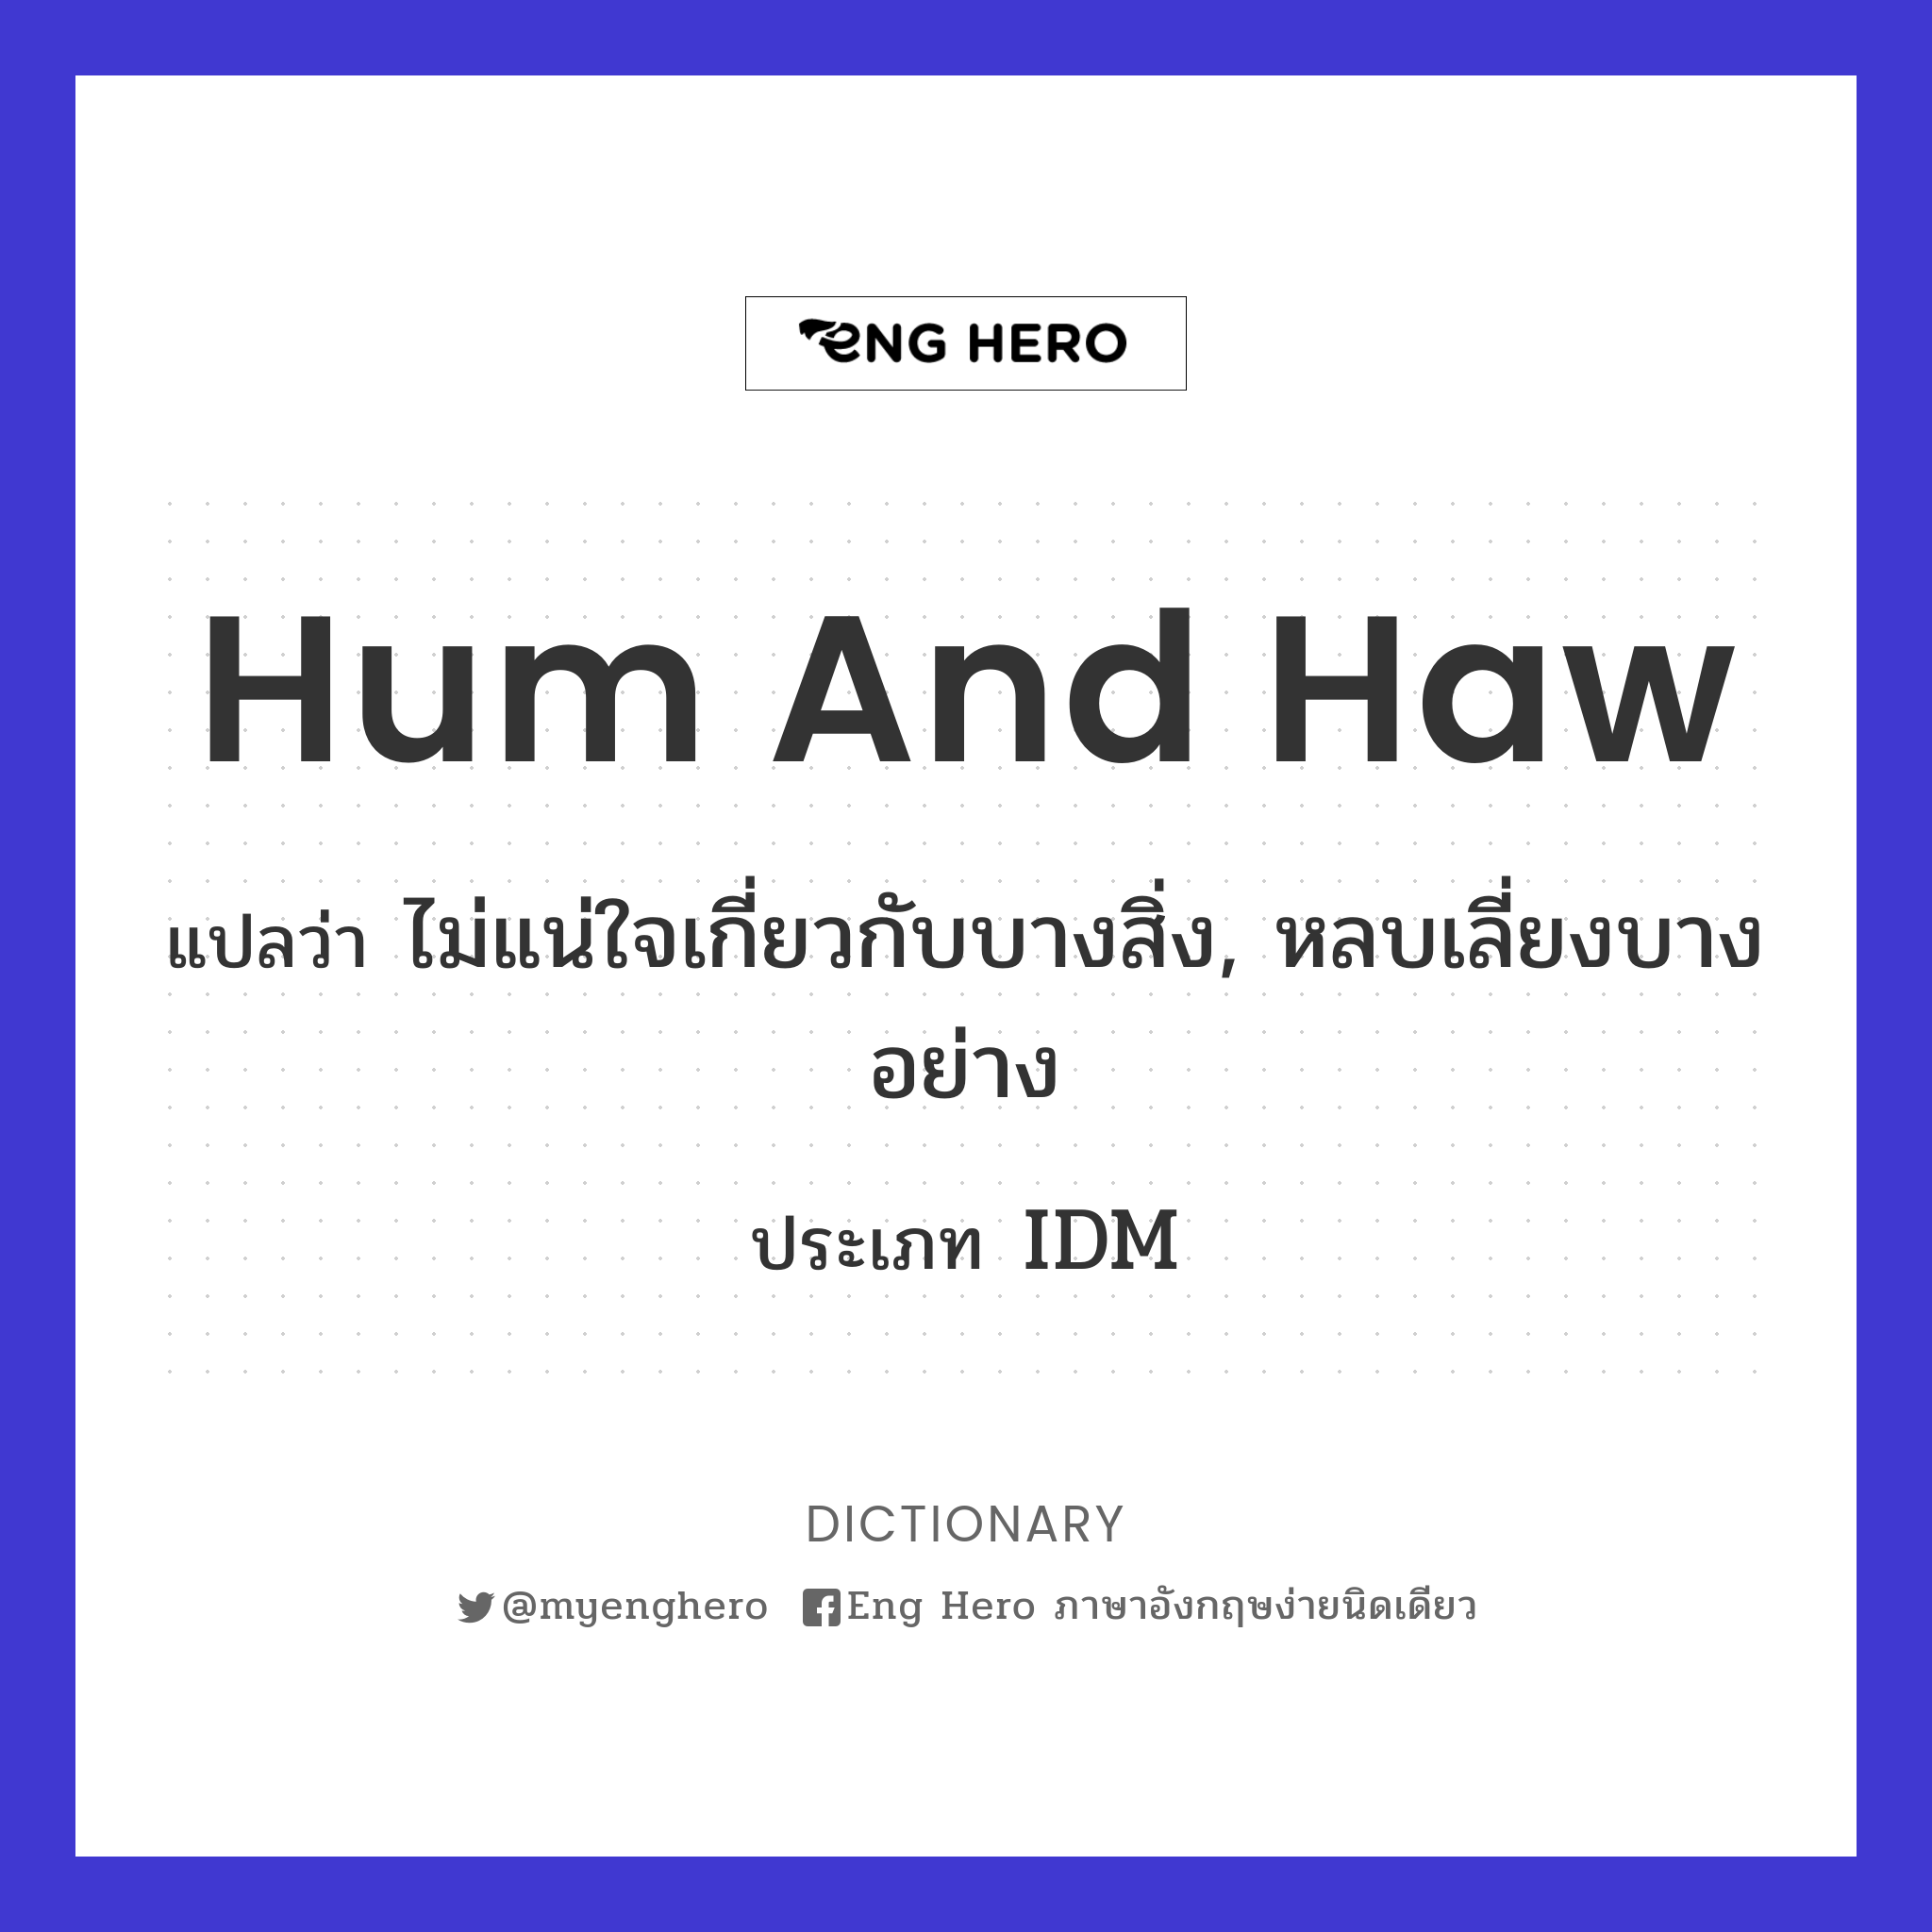 hum and haw